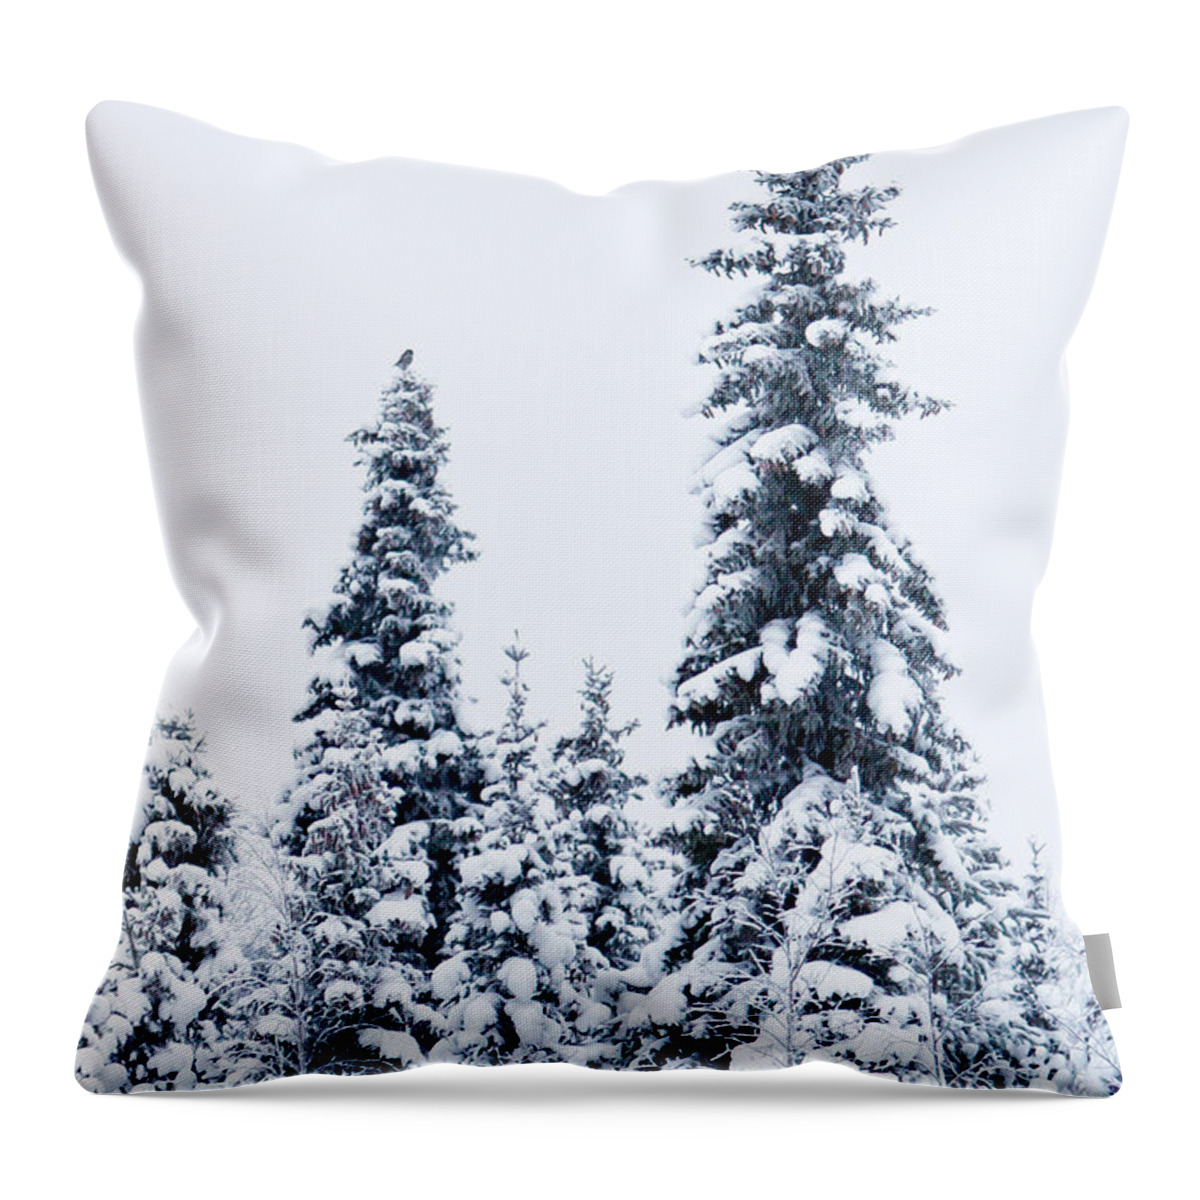 Snow Throw Pillow featuring the photograph Northern Hawk Owl In Landscape by Stefan Gerrits Nature & Wildlife Photography